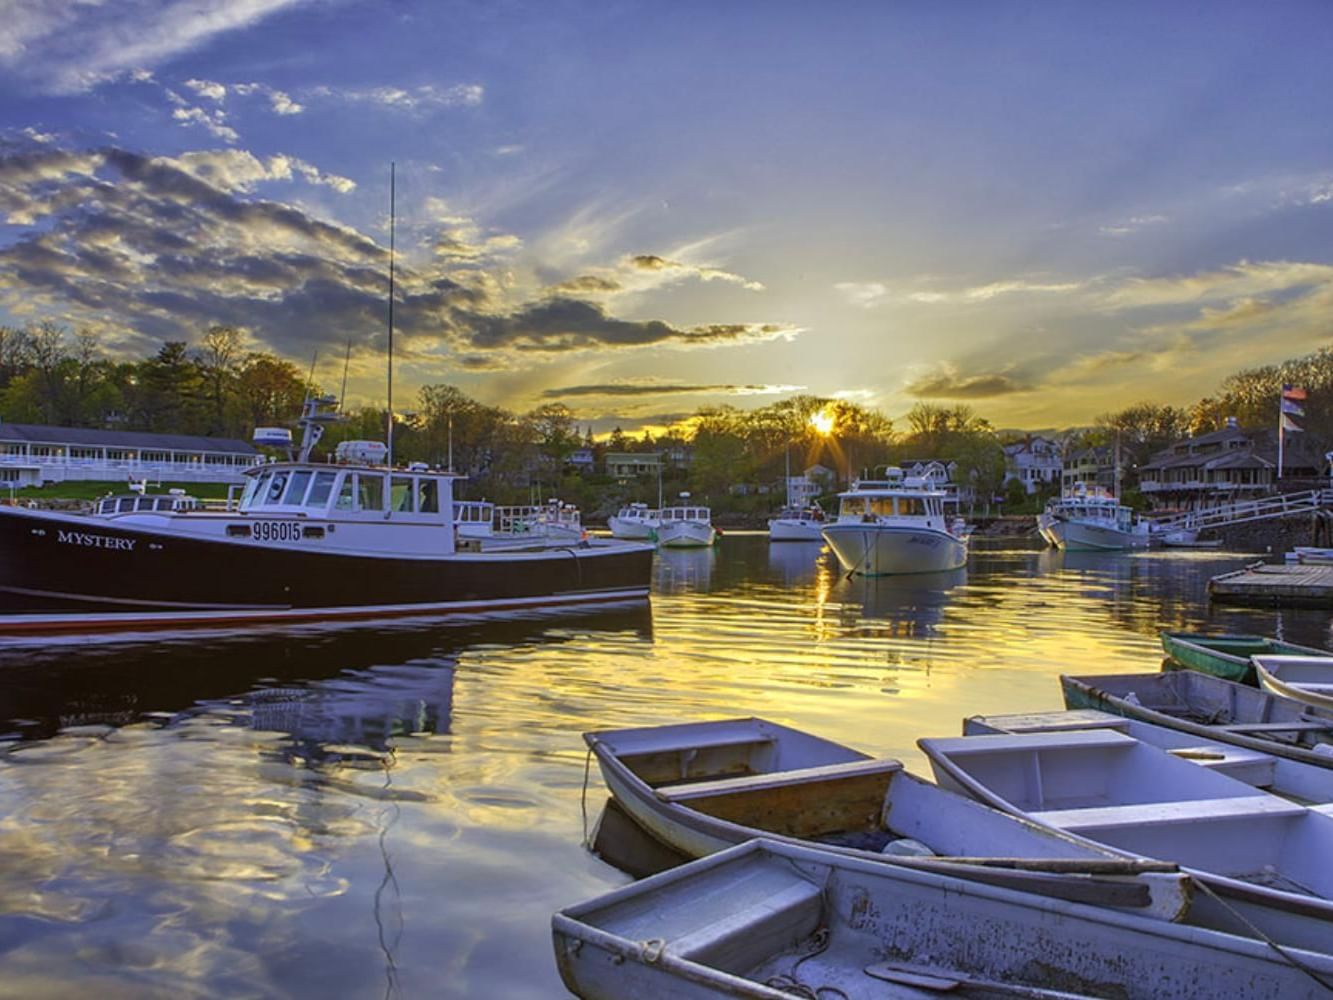 Scenic view of boats docked at a harbor during sunset near Meadowmere Resort